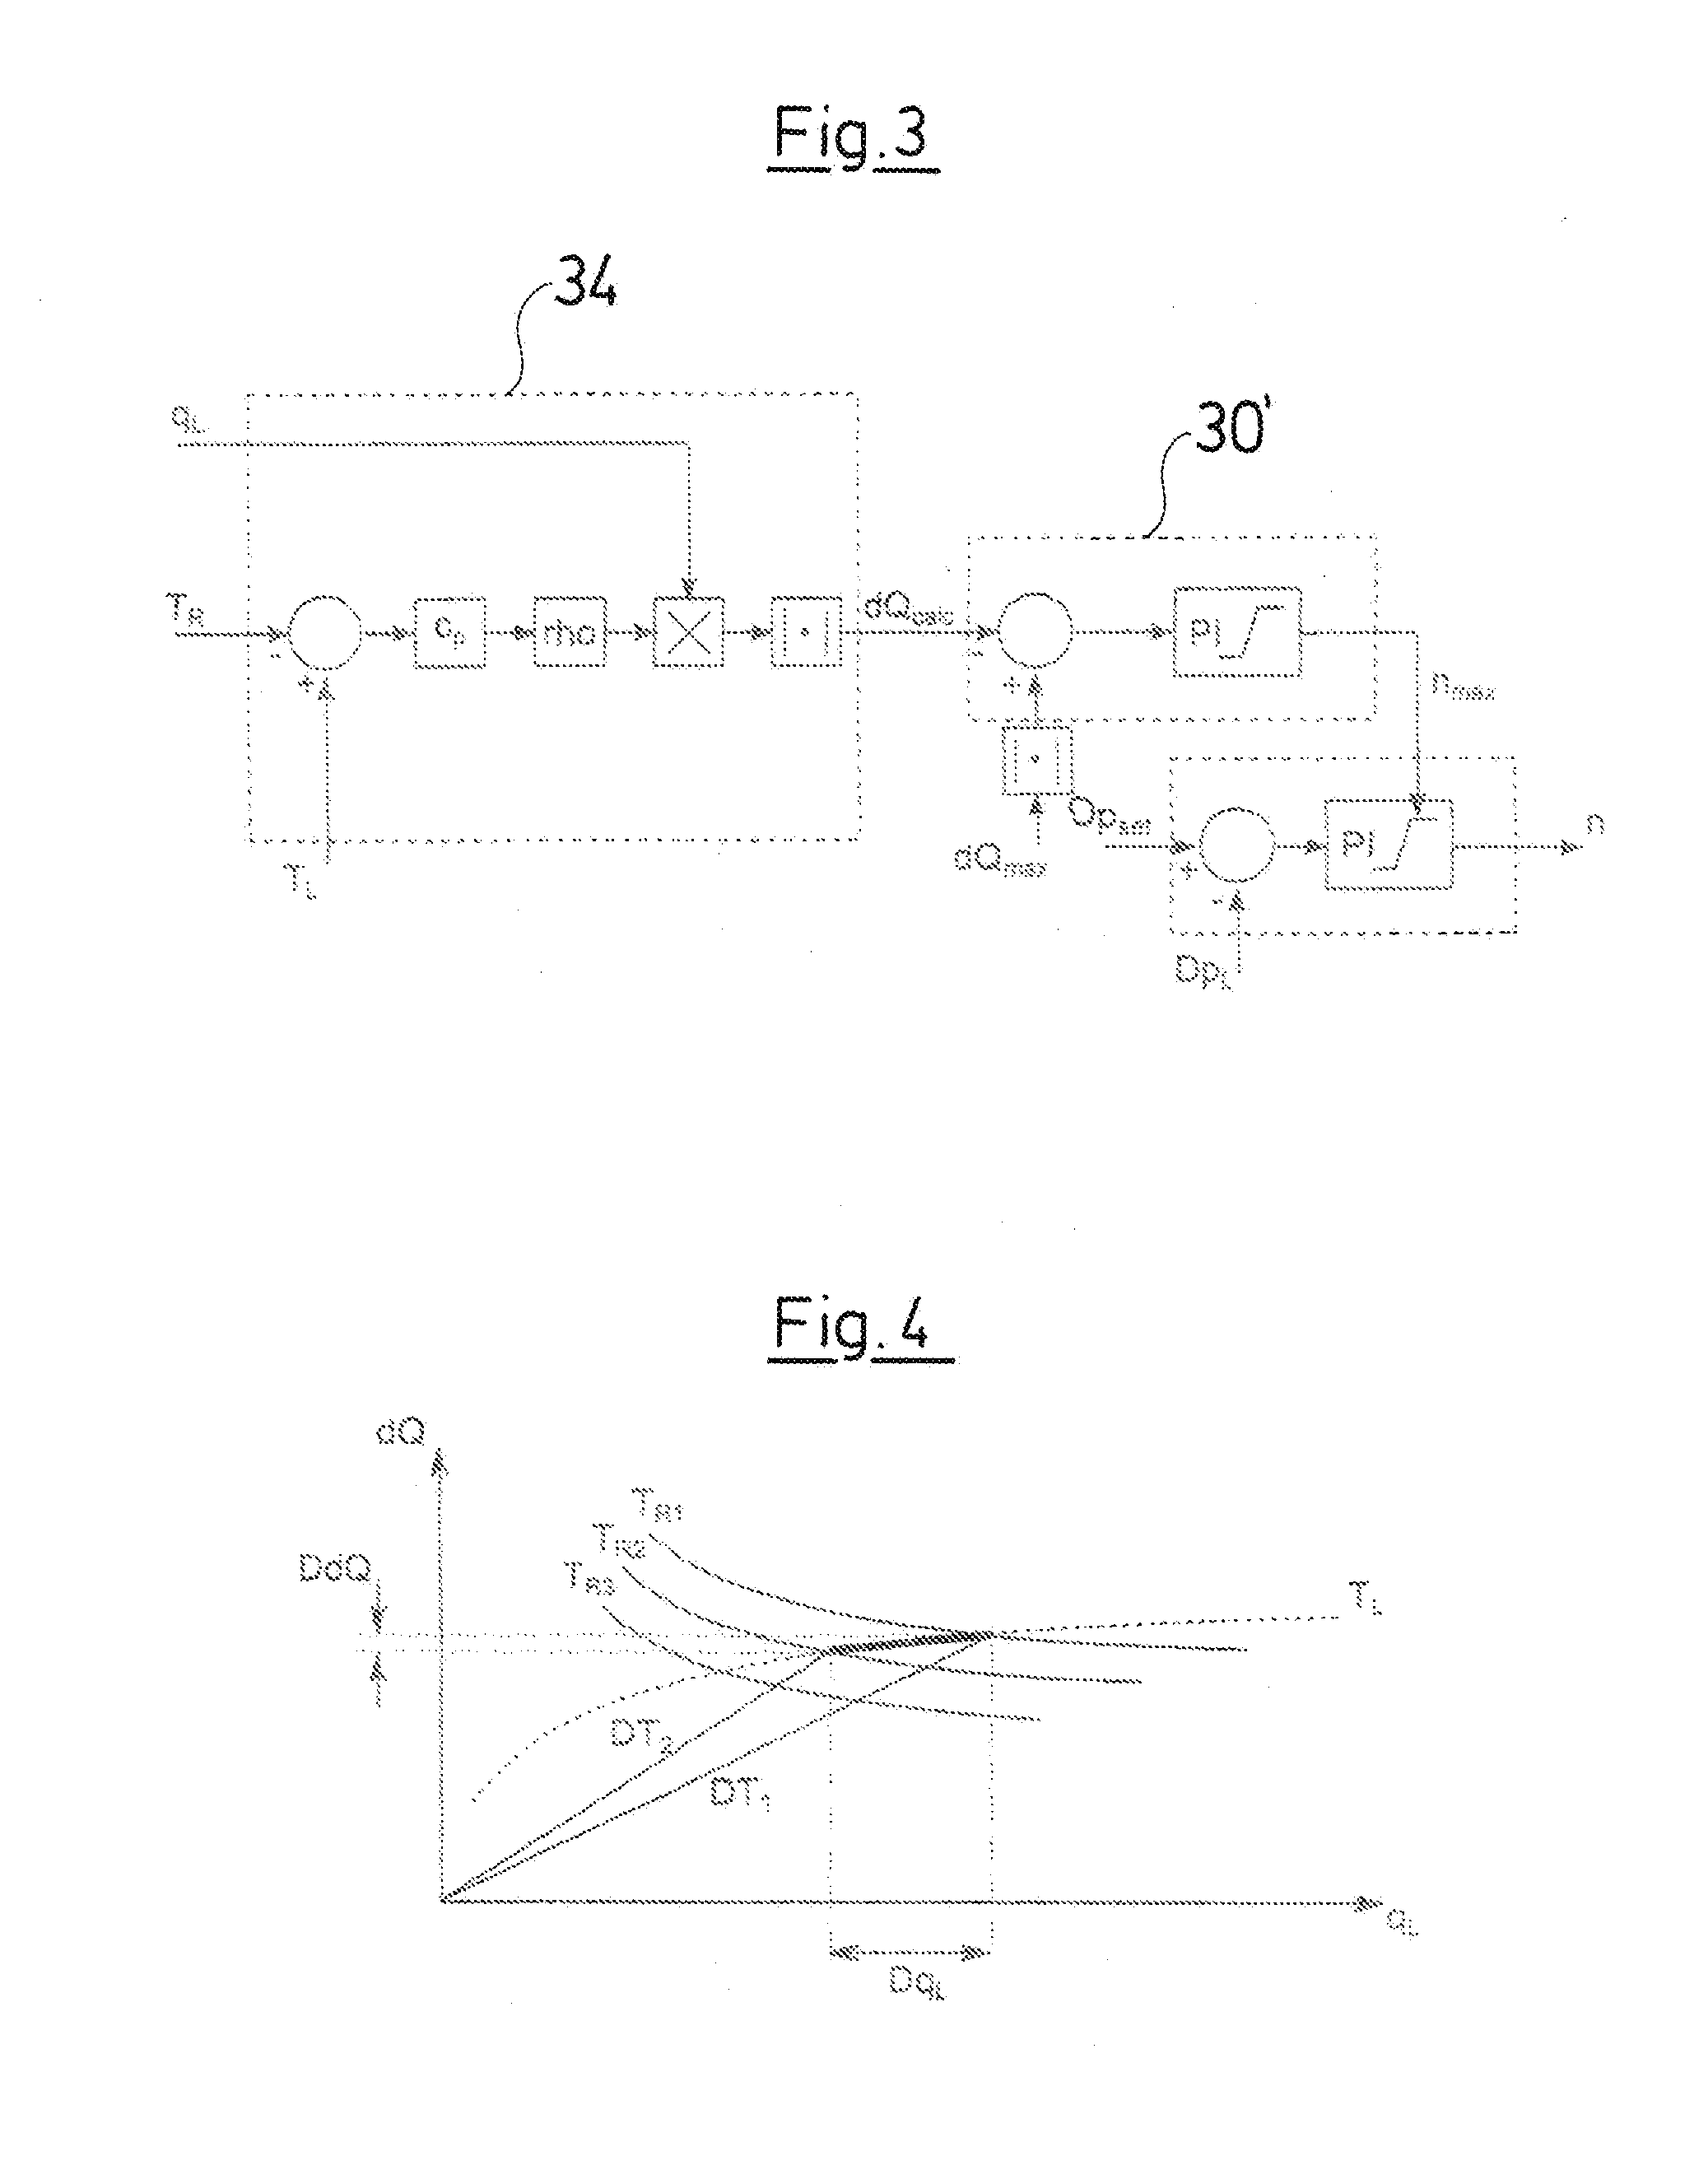 Method for limiting a supply flow in a heat transfer system